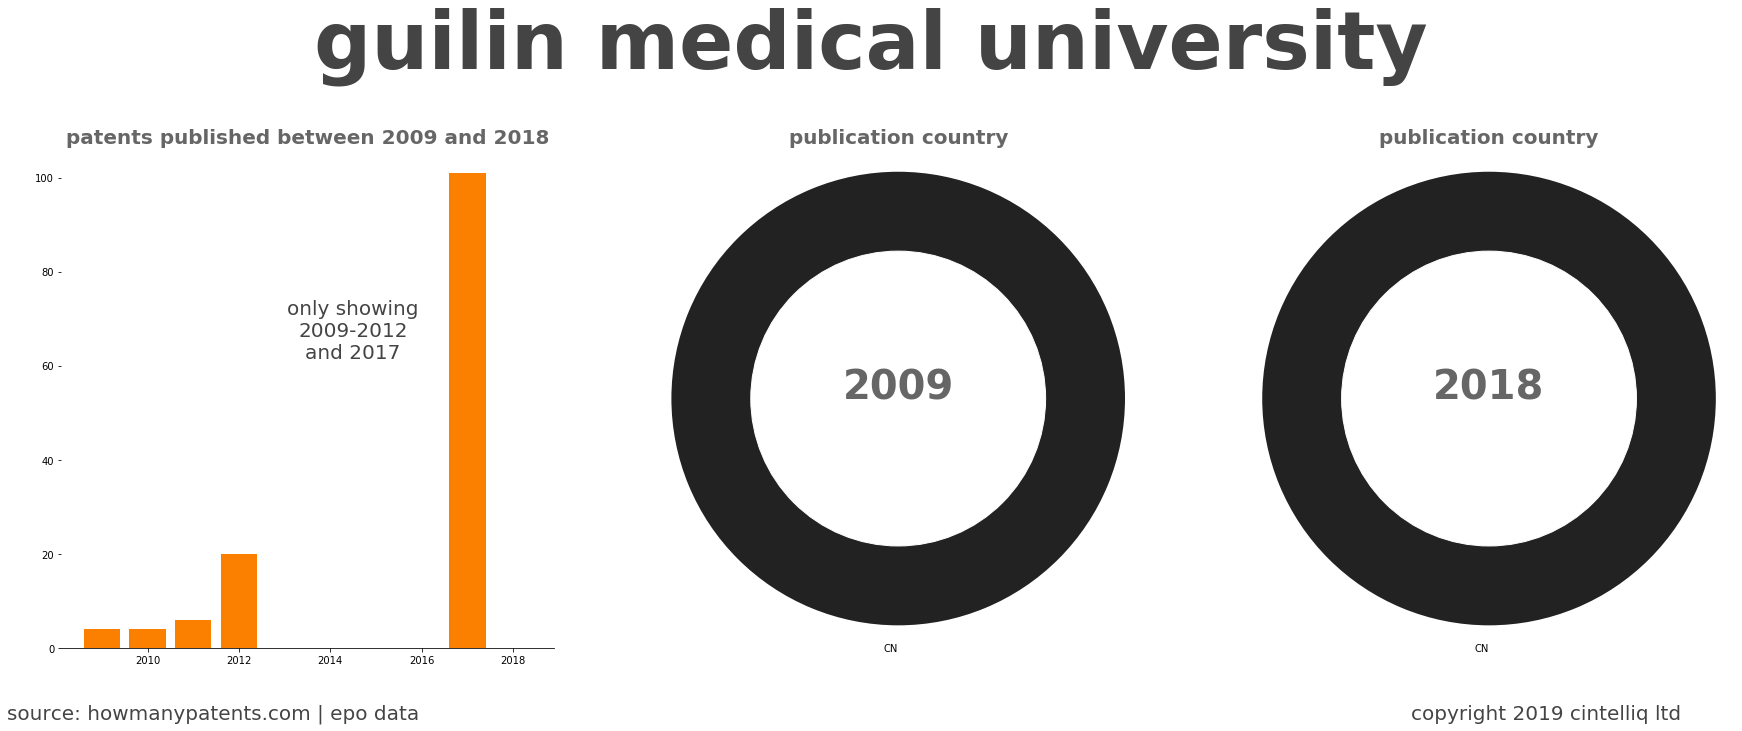 summary of patents for Guilin Medical University